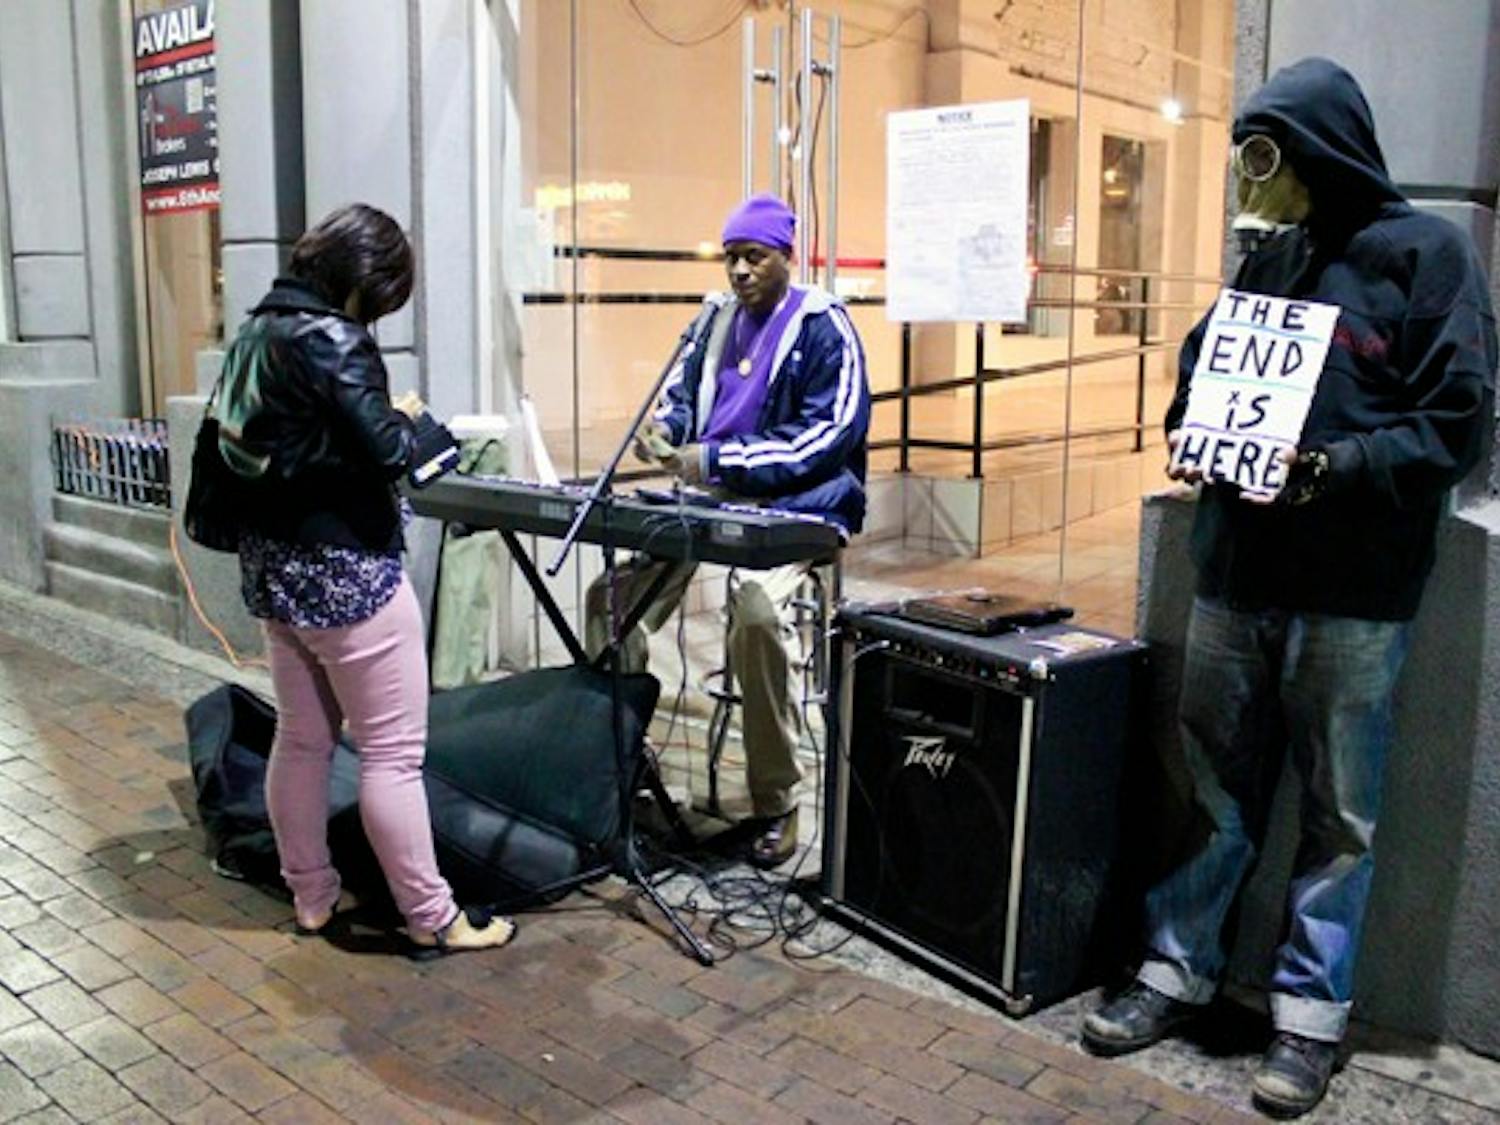 A man in purple, who refused to disclose his name, performs on Mill Avenue for extra cash while a homeless man named Sideshow wearing a gas mask holds a sign informing bystanders that “The End is Here.” (Photo by Marissa Krings)